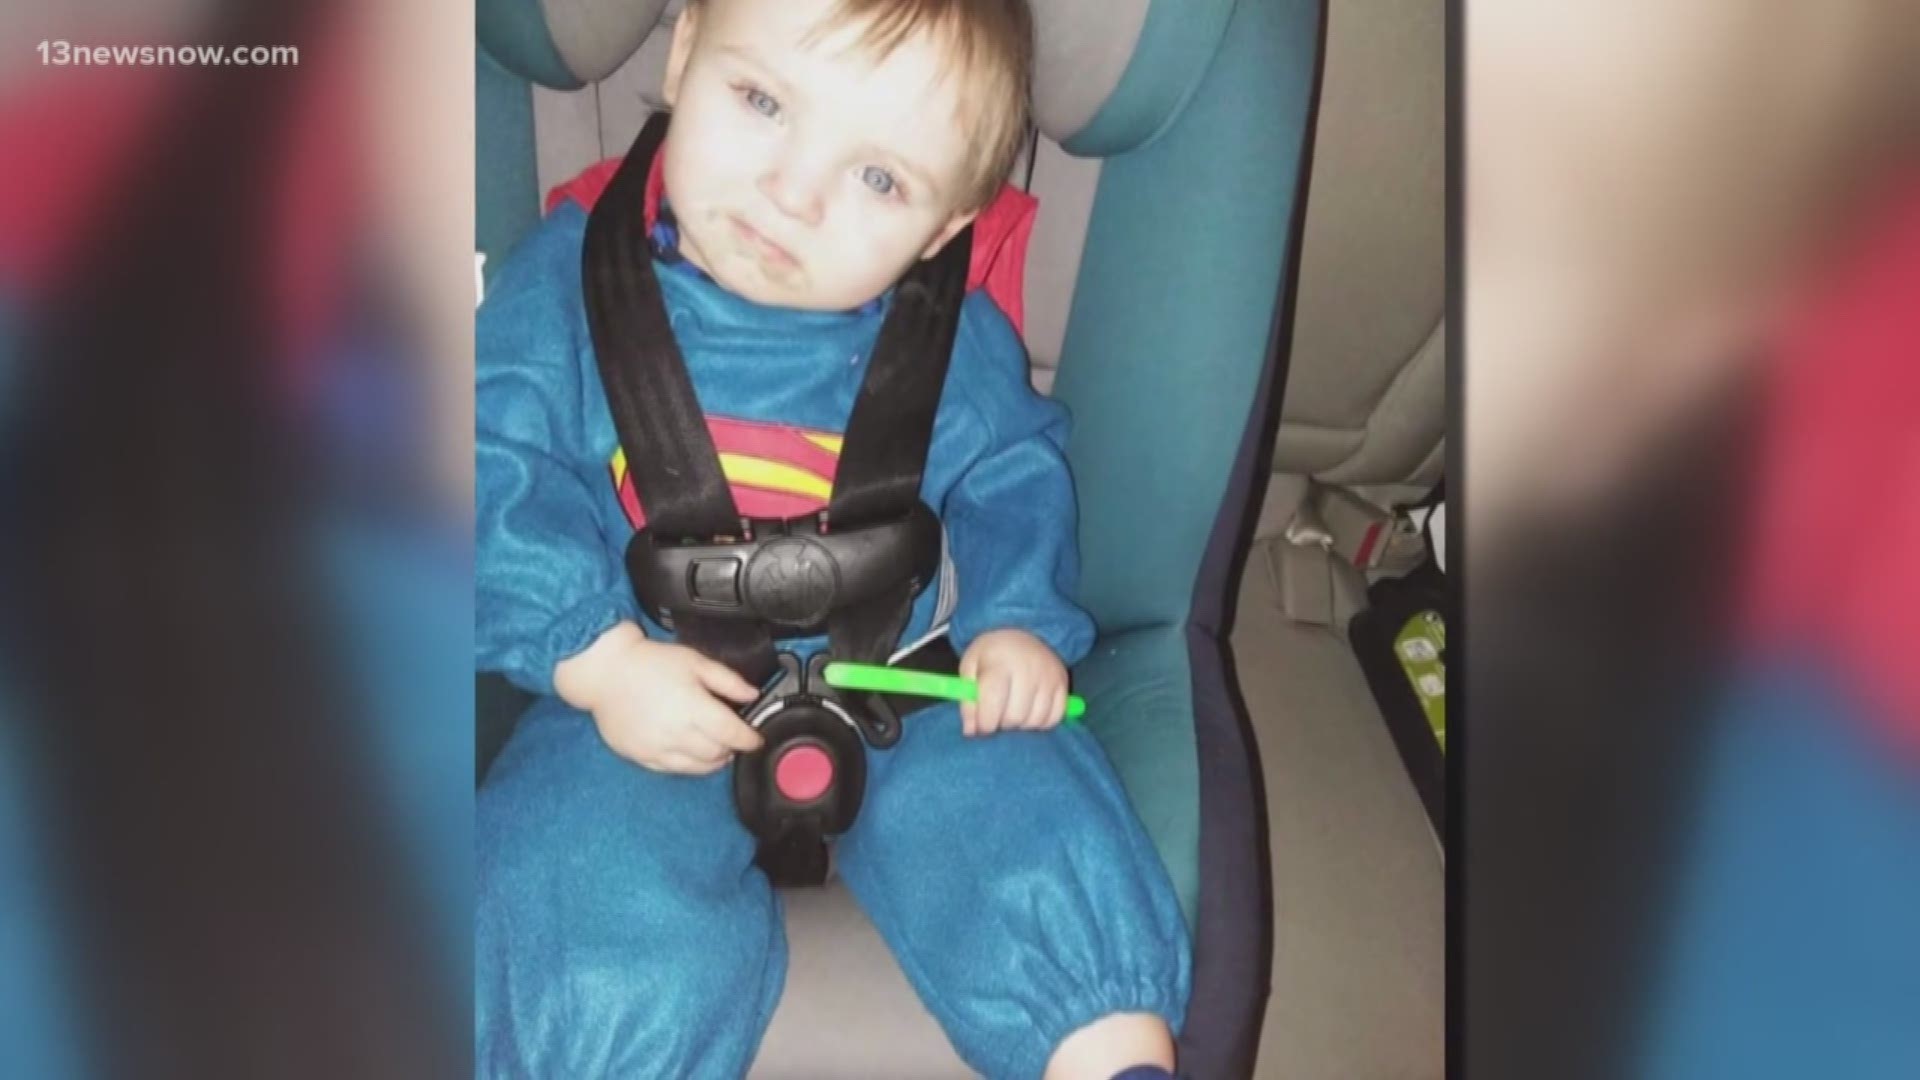 13News Now had the opportunity to interview family members of Noah Tomlin, the 2-year-old who went missing and was later found dead in Hampton. Tomlin's grandparents said they saw Noah the Tuesday before his mother reported him missing.